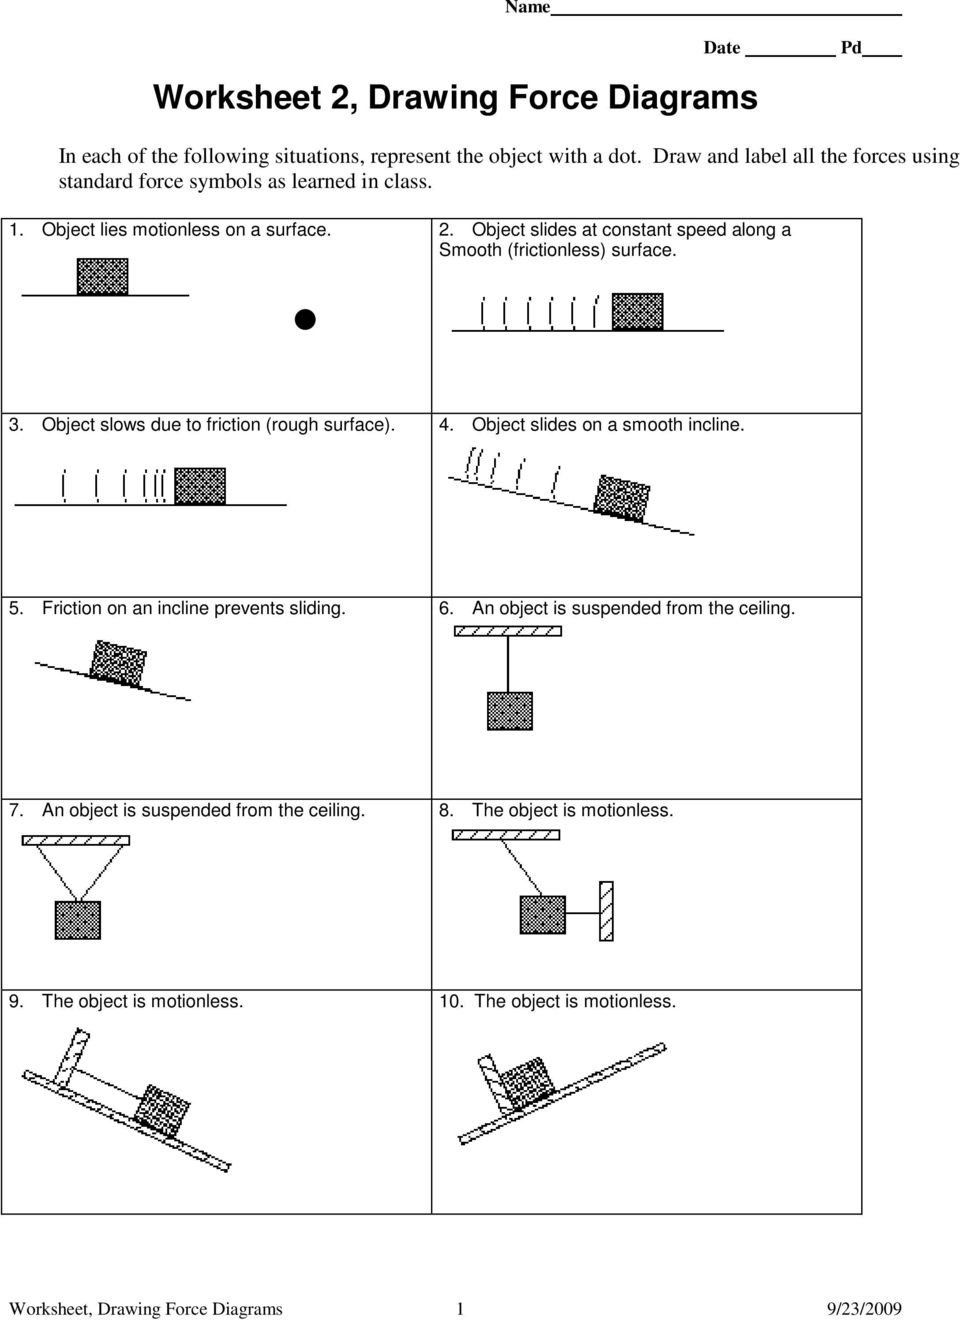 Physics Free Body Diagram Worksheet Answers Db excel